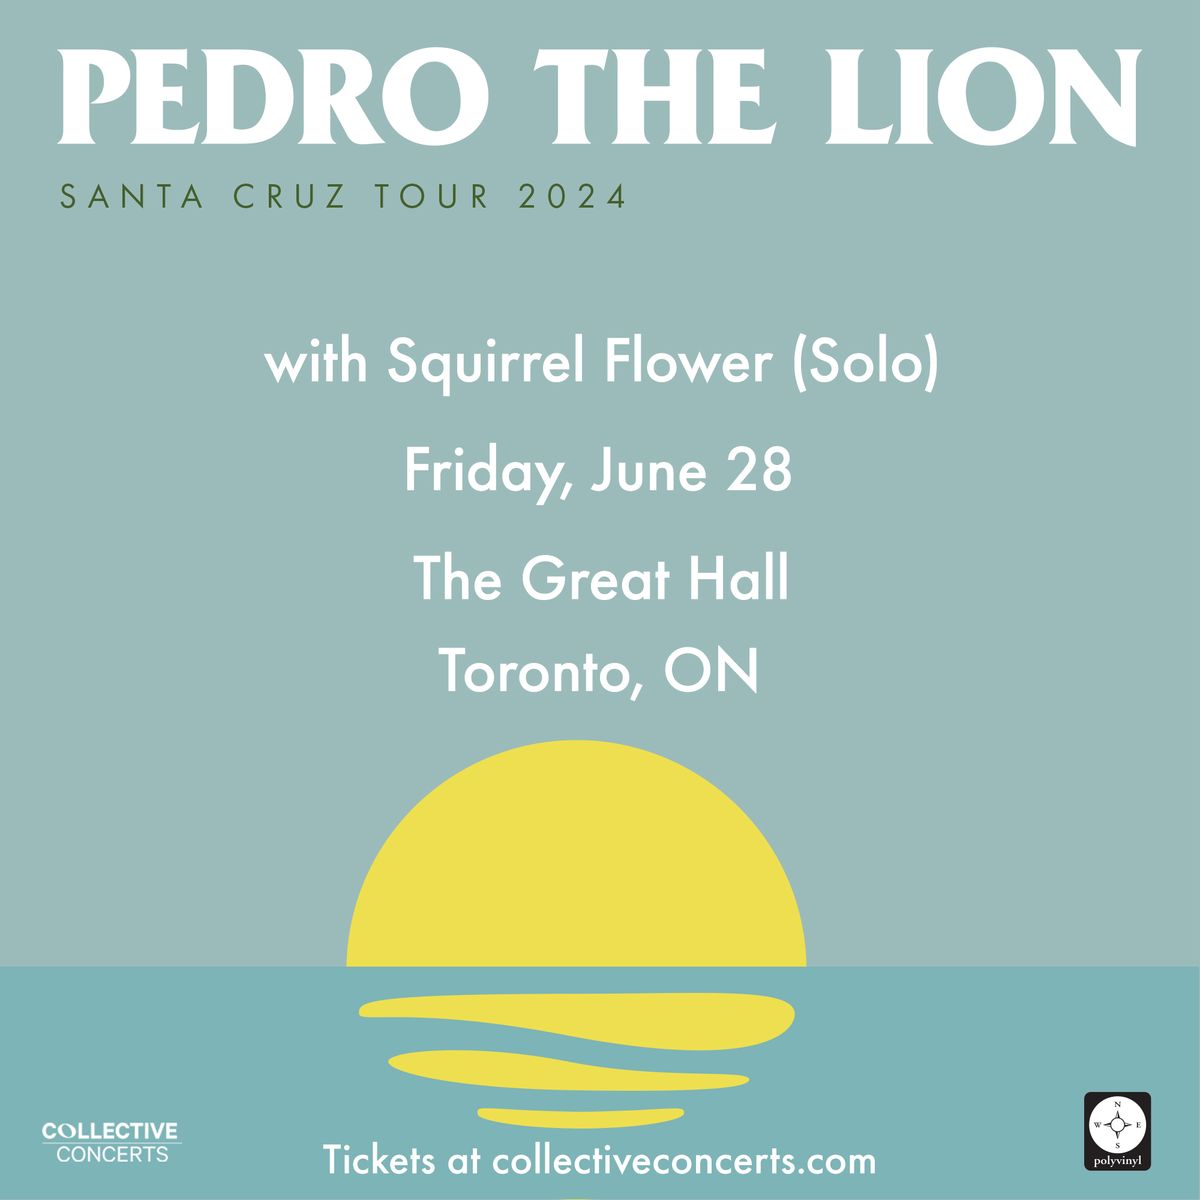 Pedro the Lion at The Great Hall